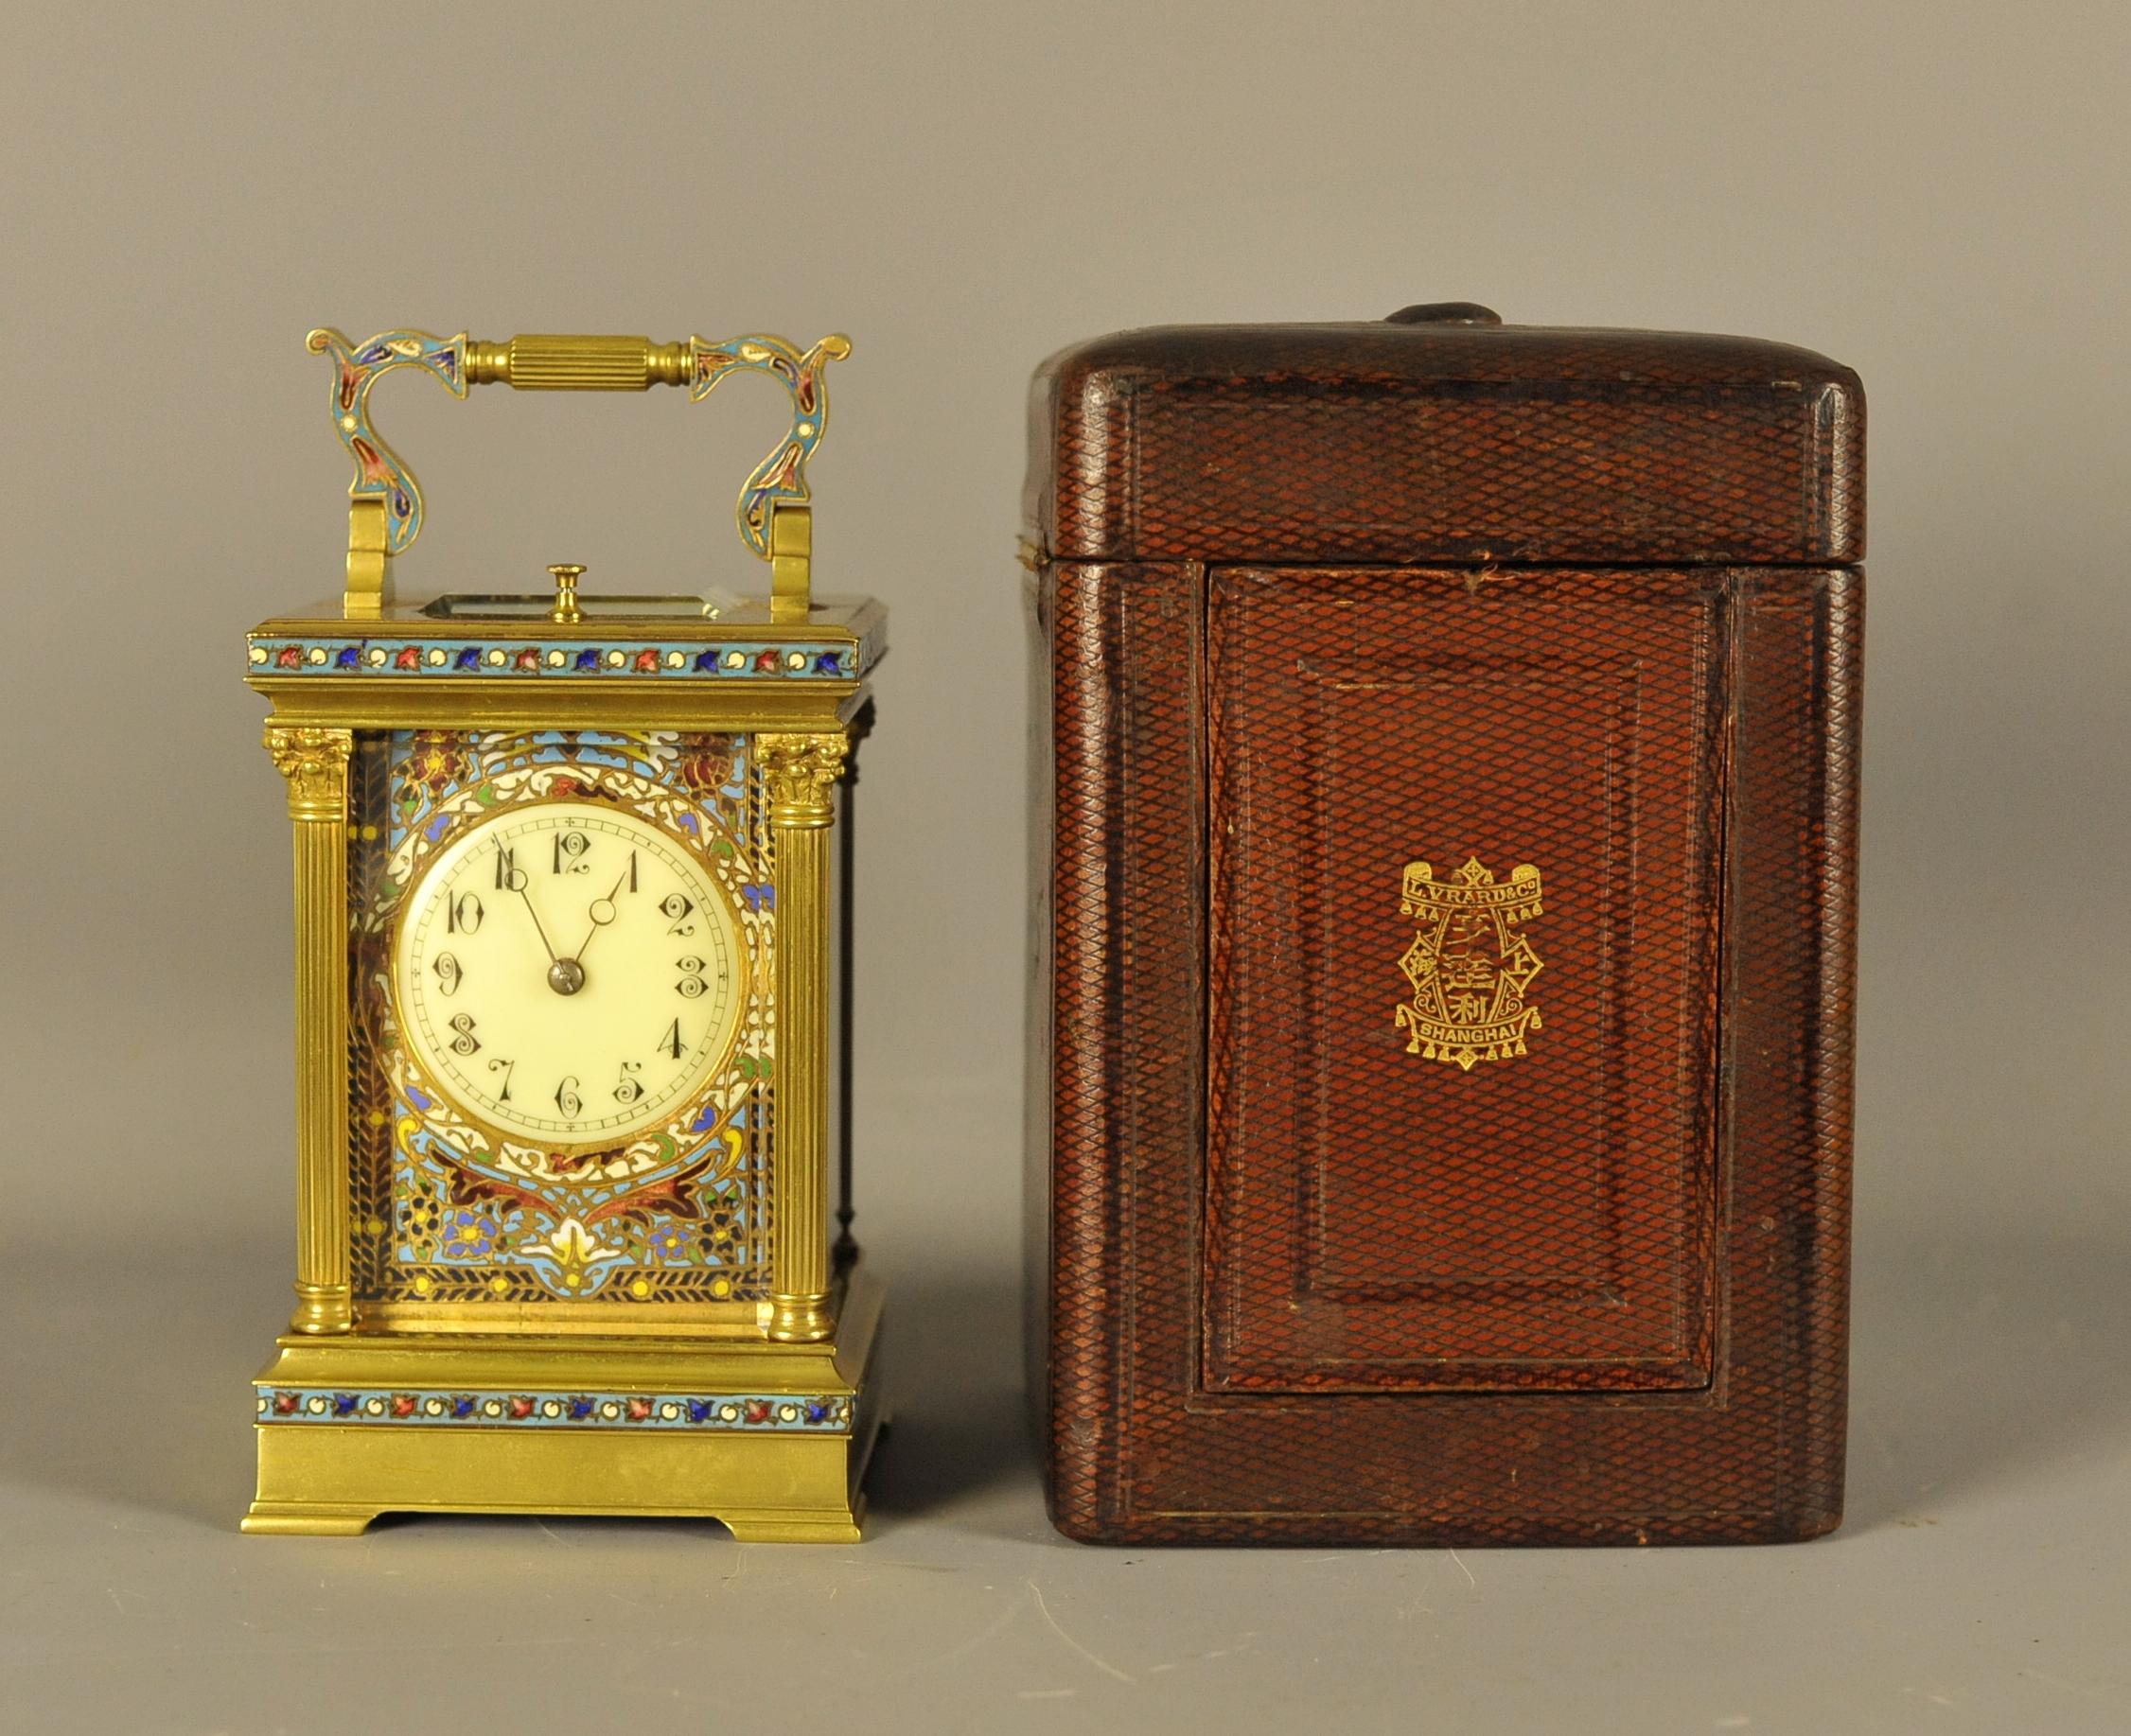 This is a beautiful and rare Champleve enamel carriage clock of French manufacture dating from the turn of the 19th-20th century is unsigned although the movement is of the finest quality.
The clock has a running duration of 8 days and retains its